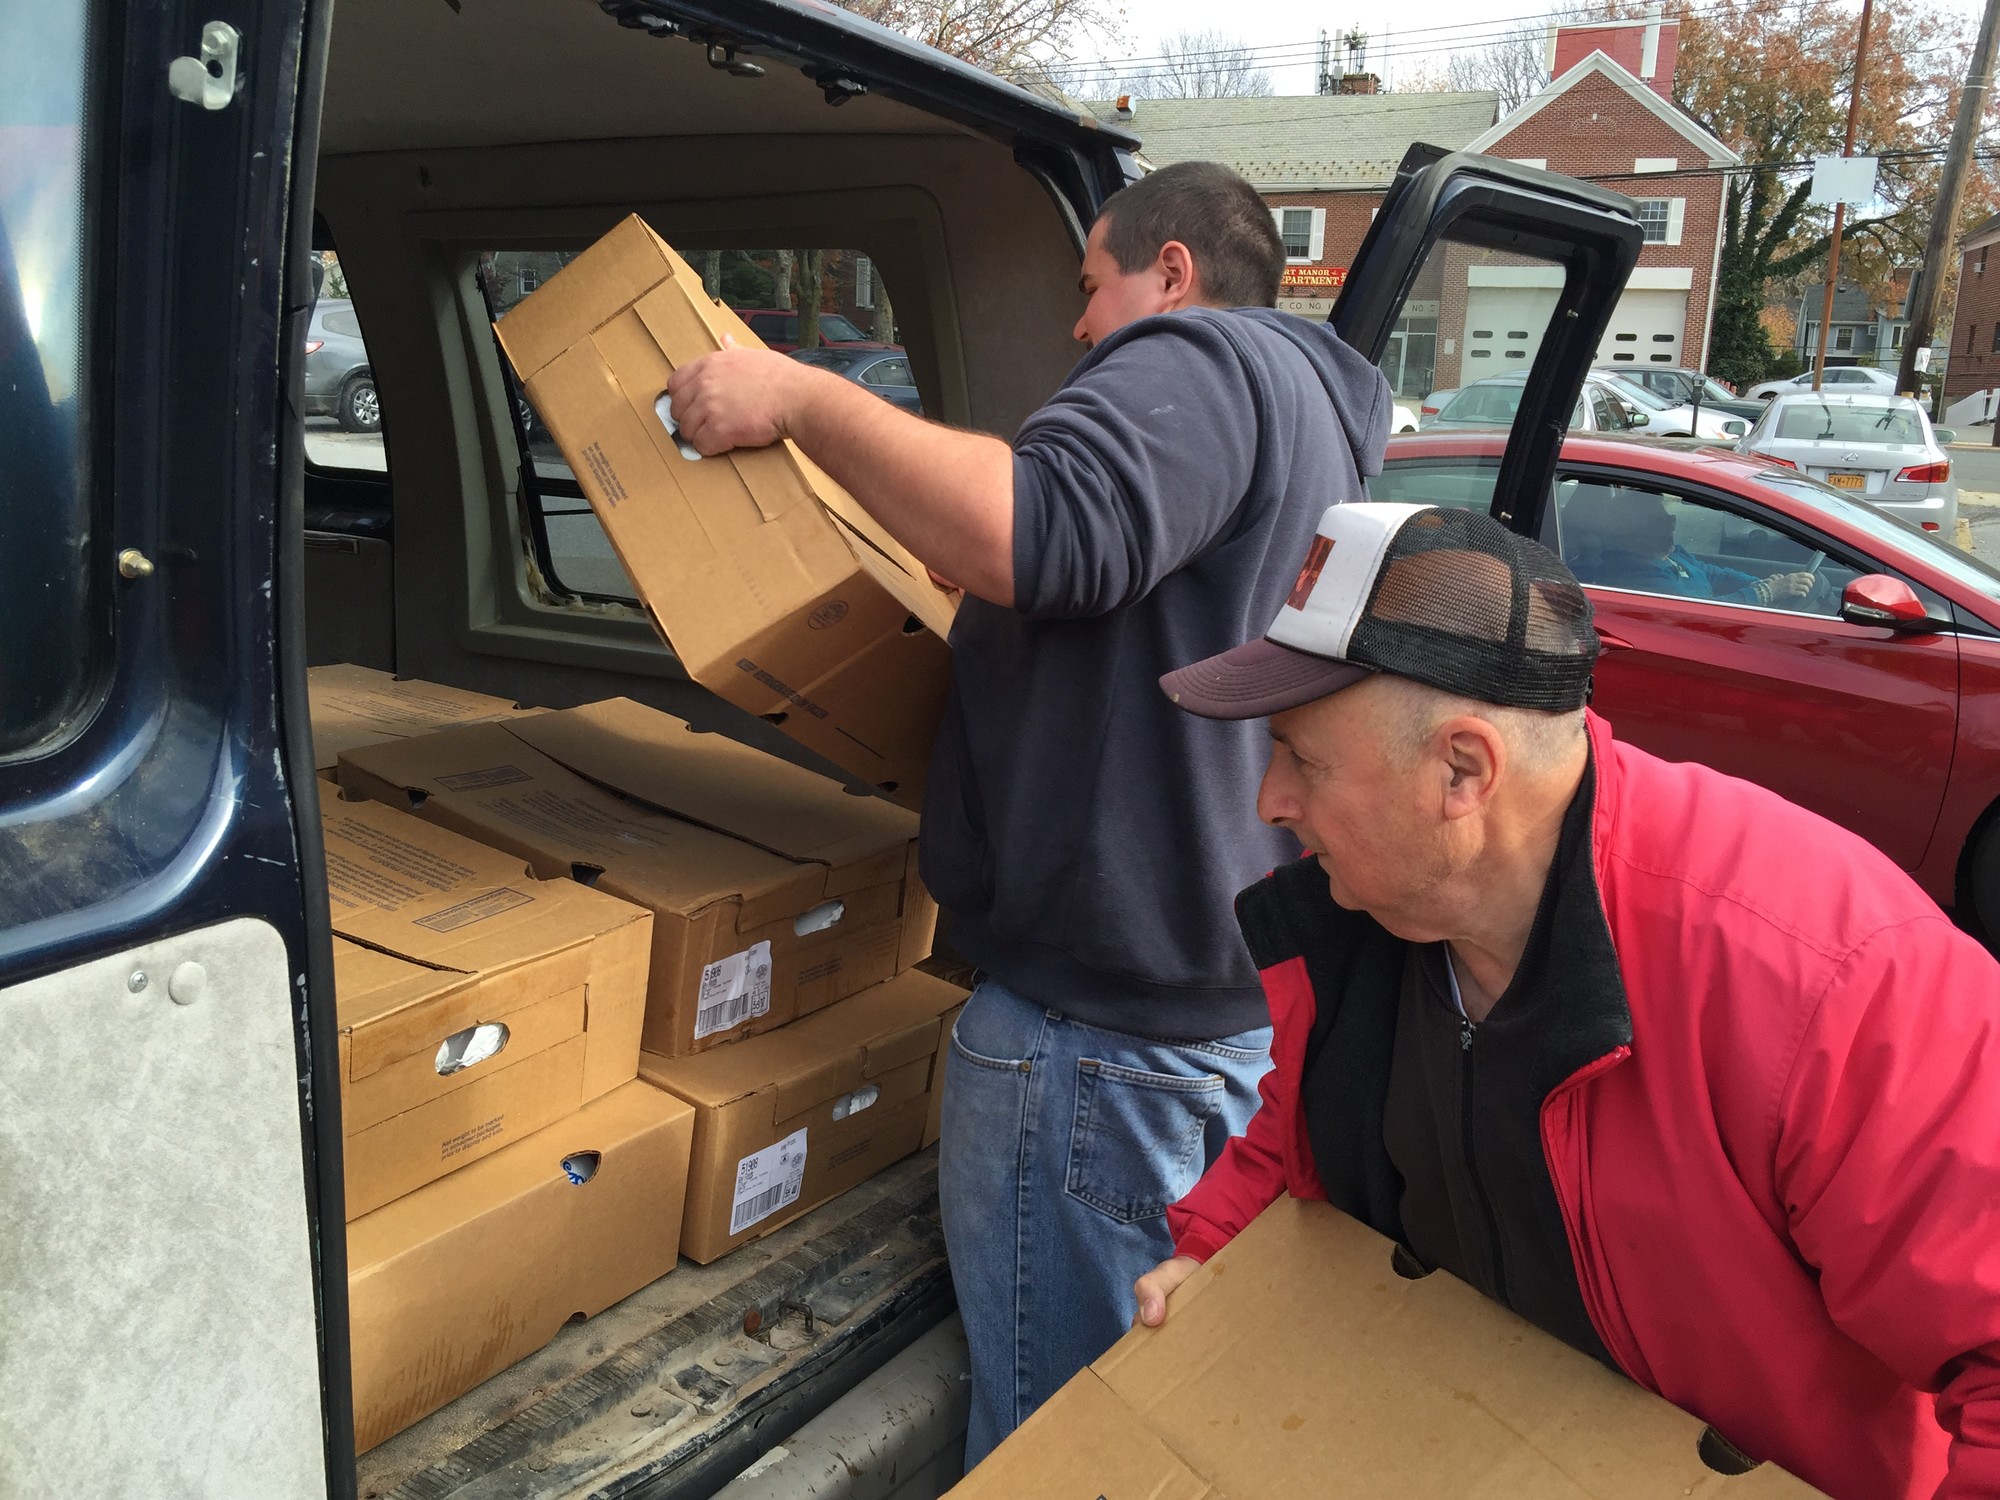 Joey Francavilla, left, and Danny Mirro picked up 64 frozen turkeys from the Key Food on Covert Avenue.